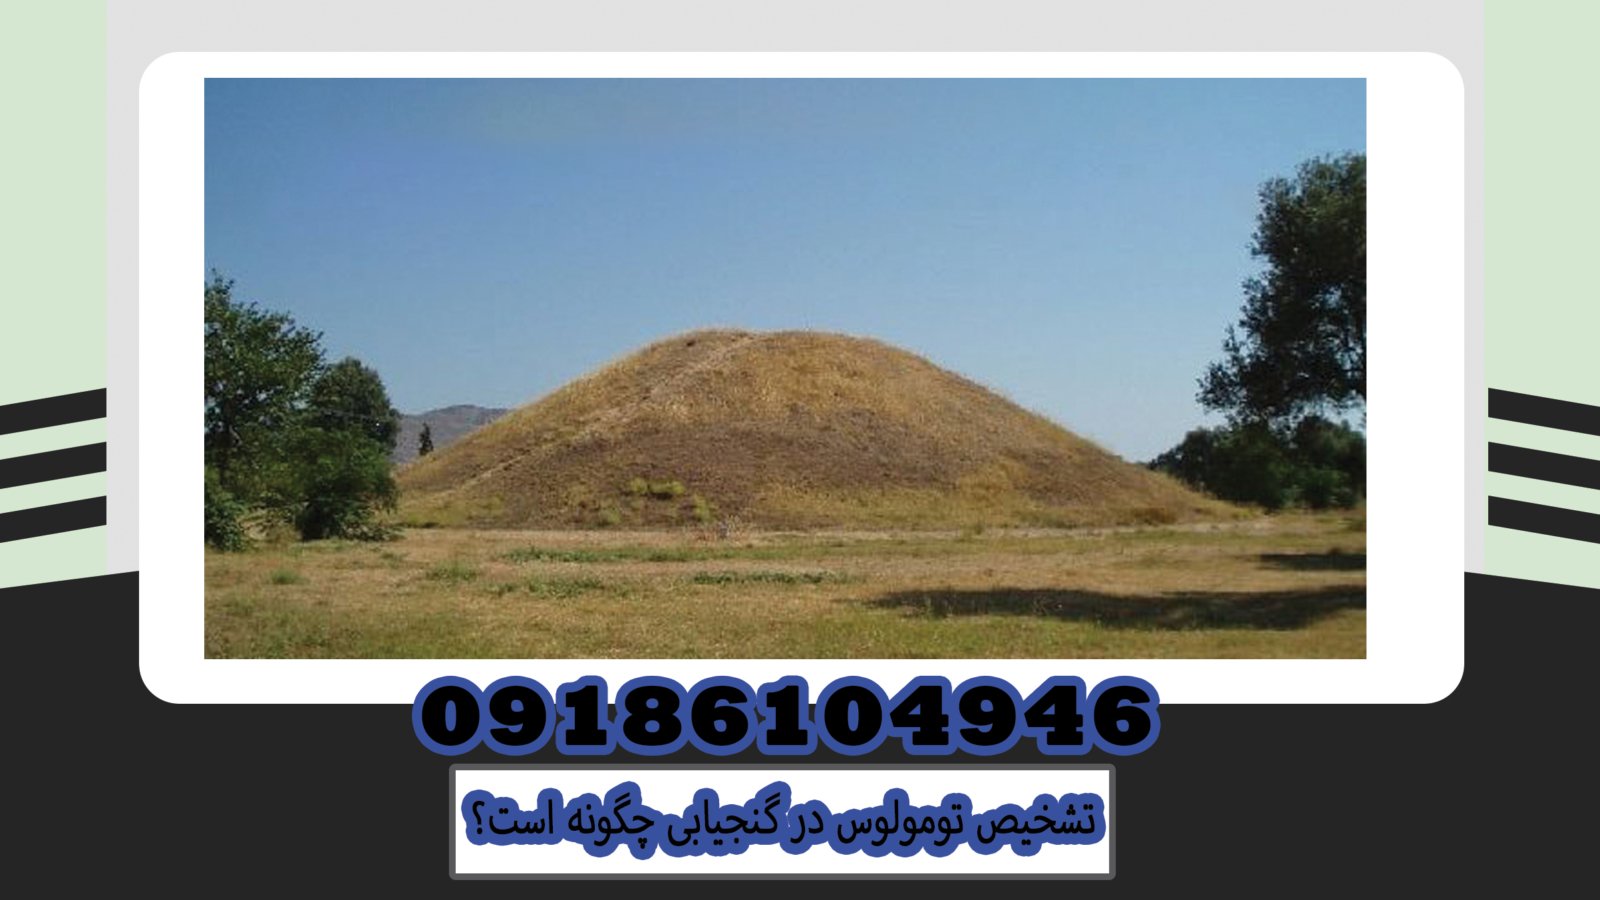 How to identify tumulus in treasure hunting?